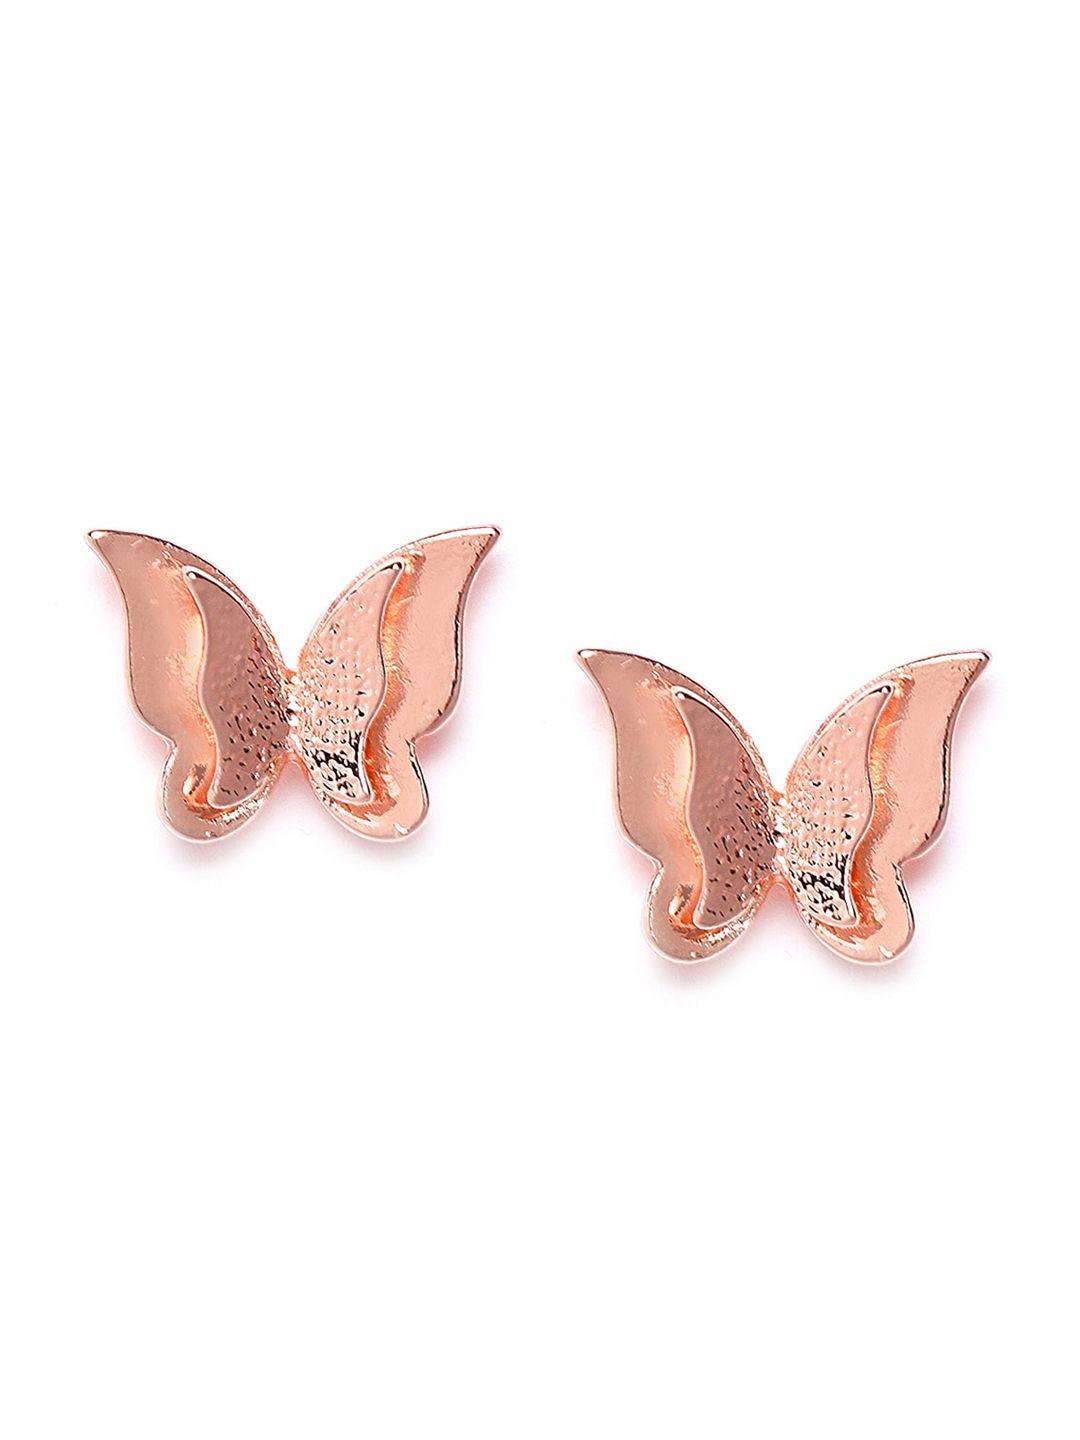 dressberry rose gold-plated contemporary studs earrings